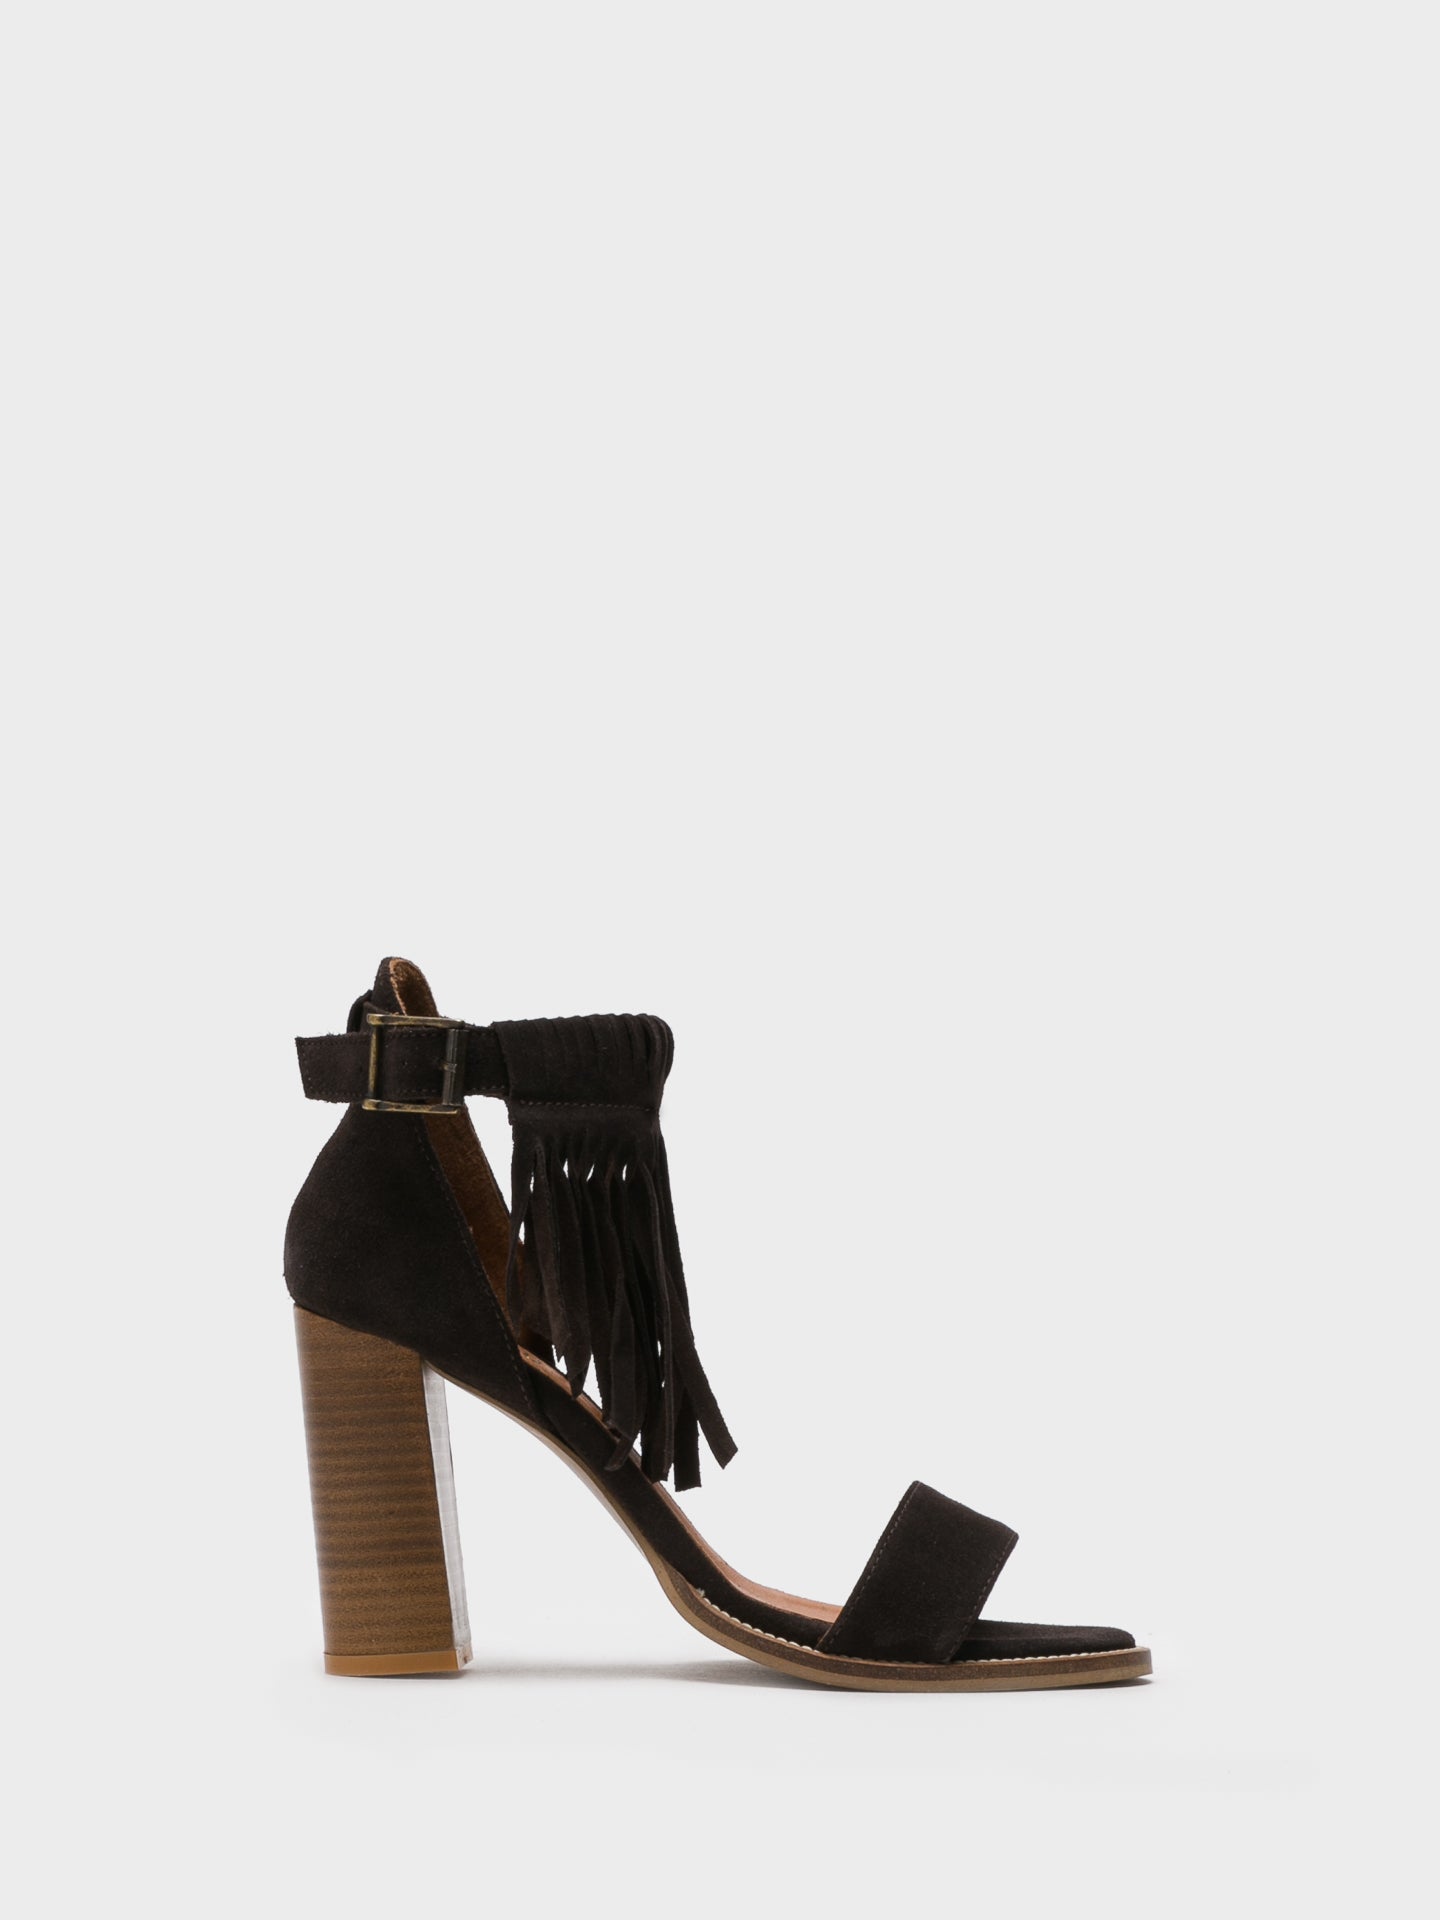 Foreva Chocolate Strappy Sandals